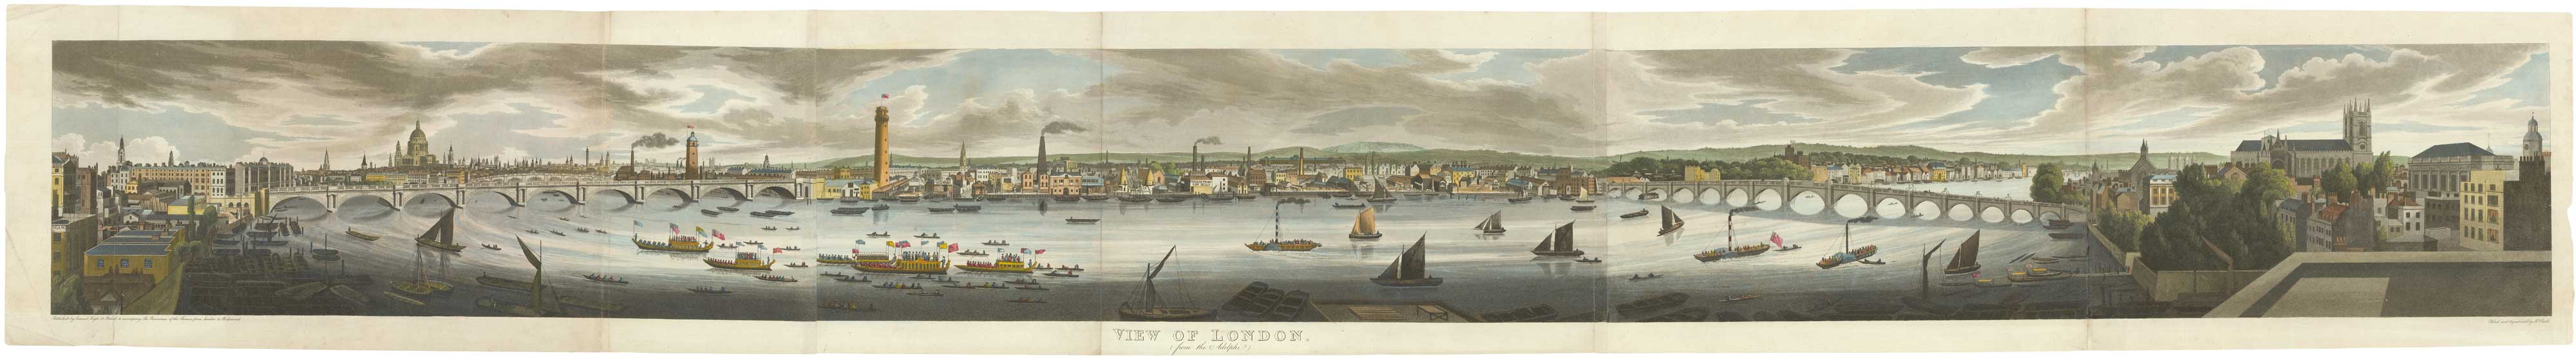 View of London from the Adelphi